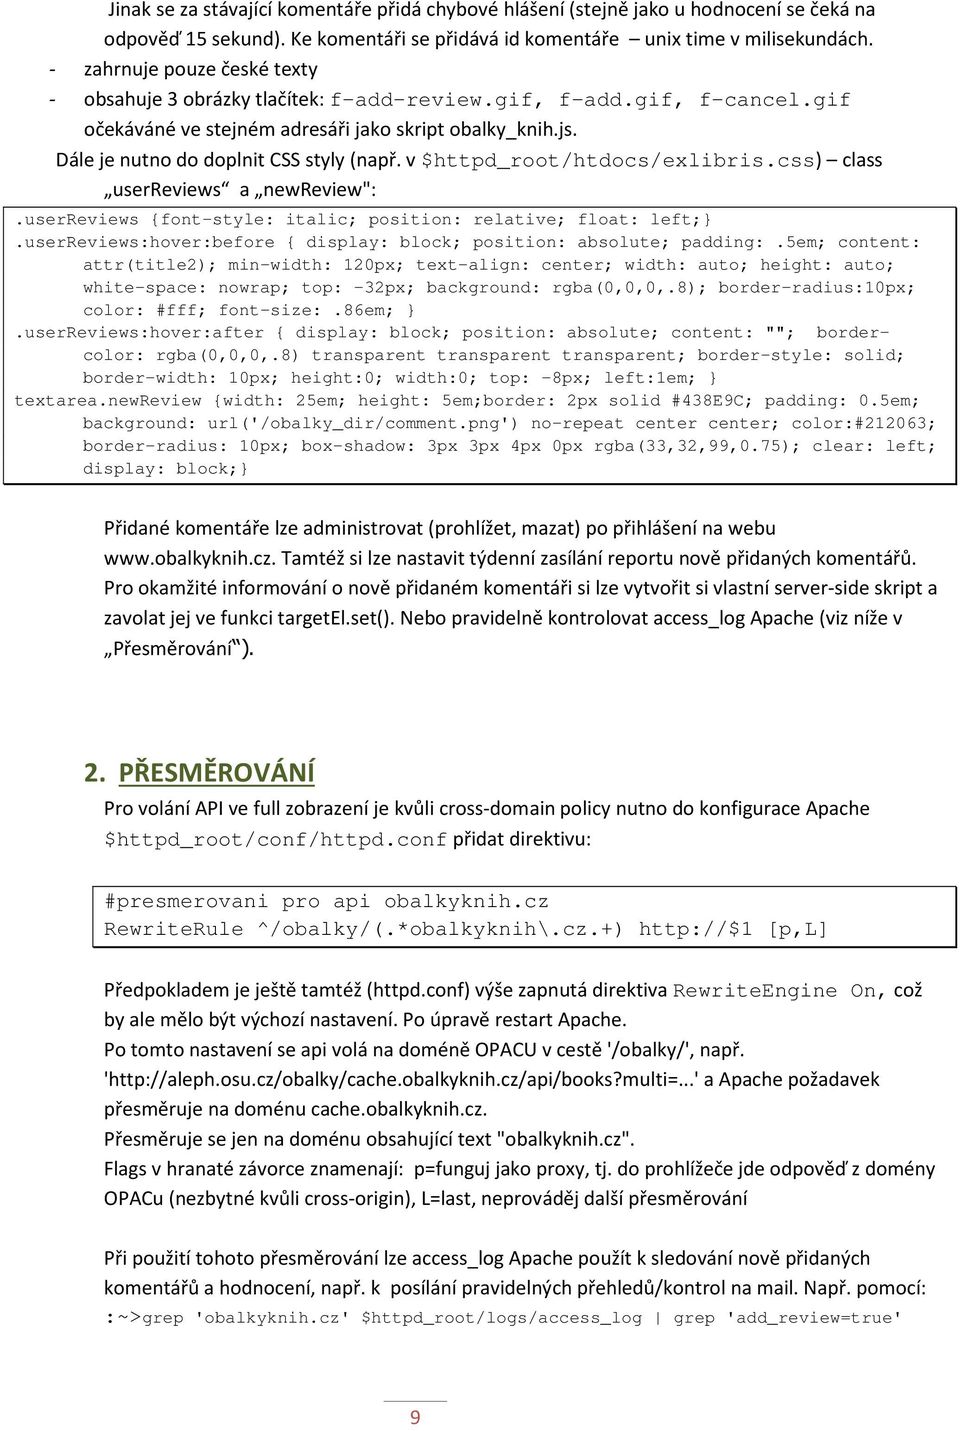 Dále je nutno do doplnit CSS styly (např. v $httpd_root/htdocs/exlibris.css) class userreviews a newreview":.userreviews {font-style: italic; position: relative; float: left;}.